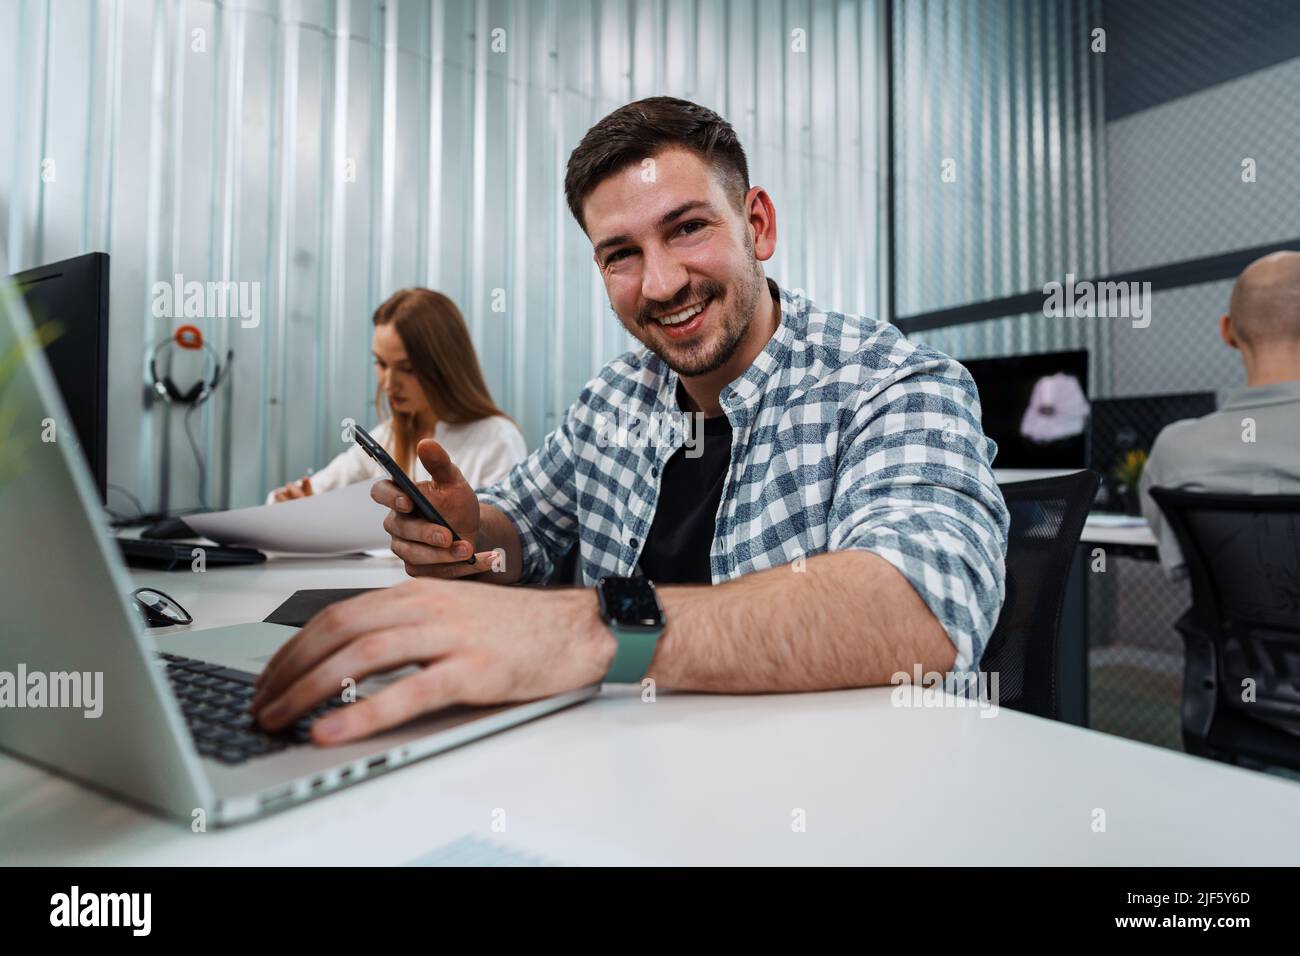 Portrait of young man sitting and working at his desk in the office. Stock Photo